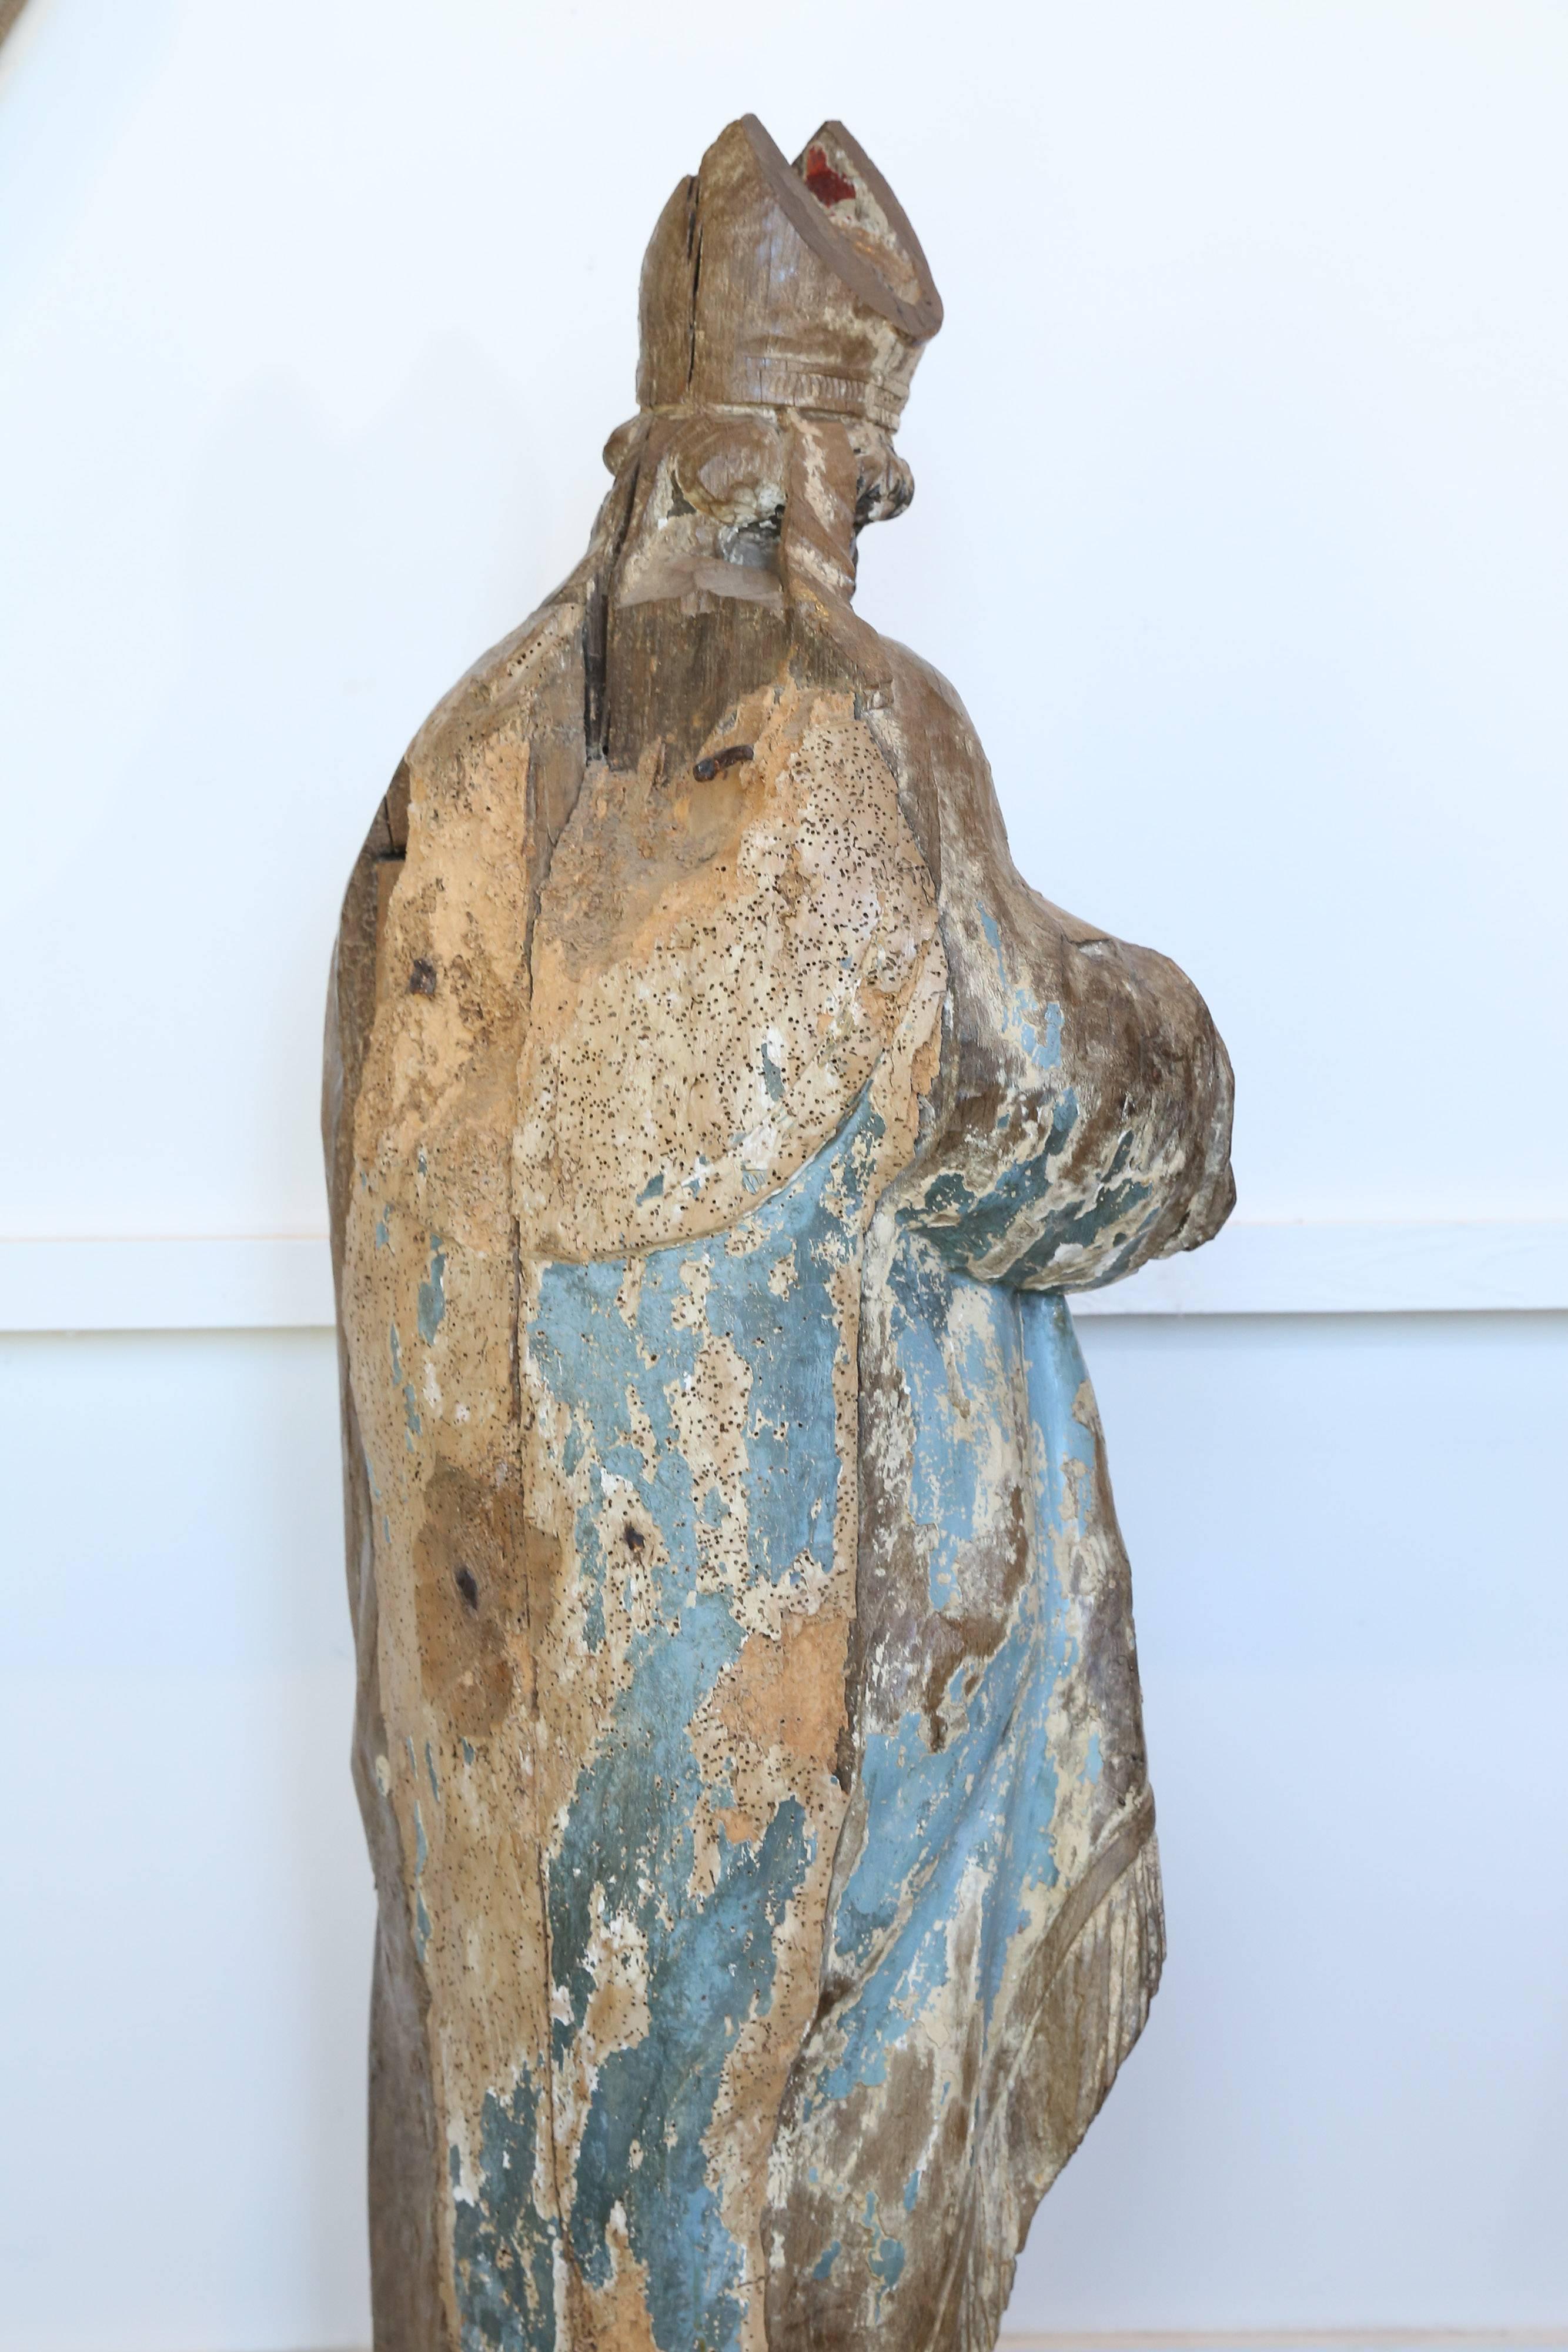 Carved from a solid piece of wood, this magnificent polychrome statue of a Catholic Cardinal is an exquisite example of the carver's art. Highly detailed and large in scale, the painted and gilded finish has been worn and dulled by age and there is